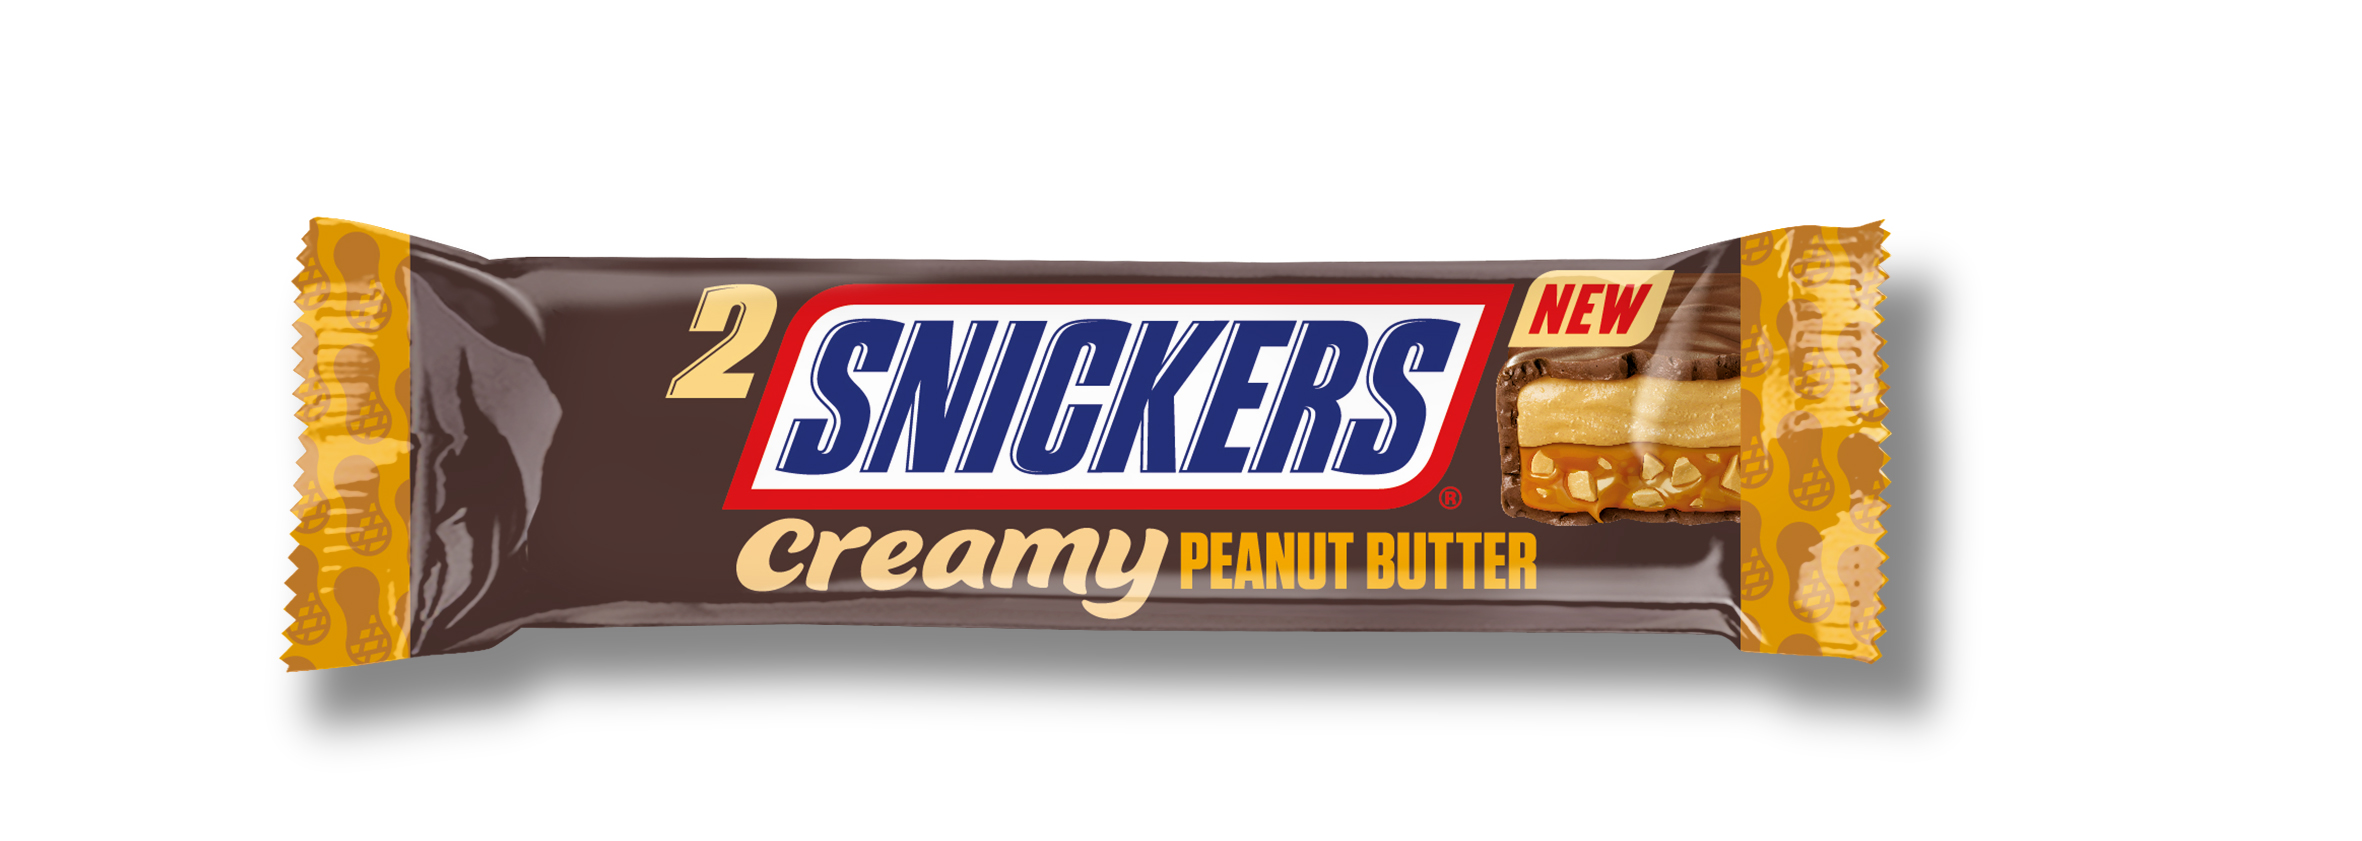 Snickers Creamy hits the shelves from Mars Wrigley UK